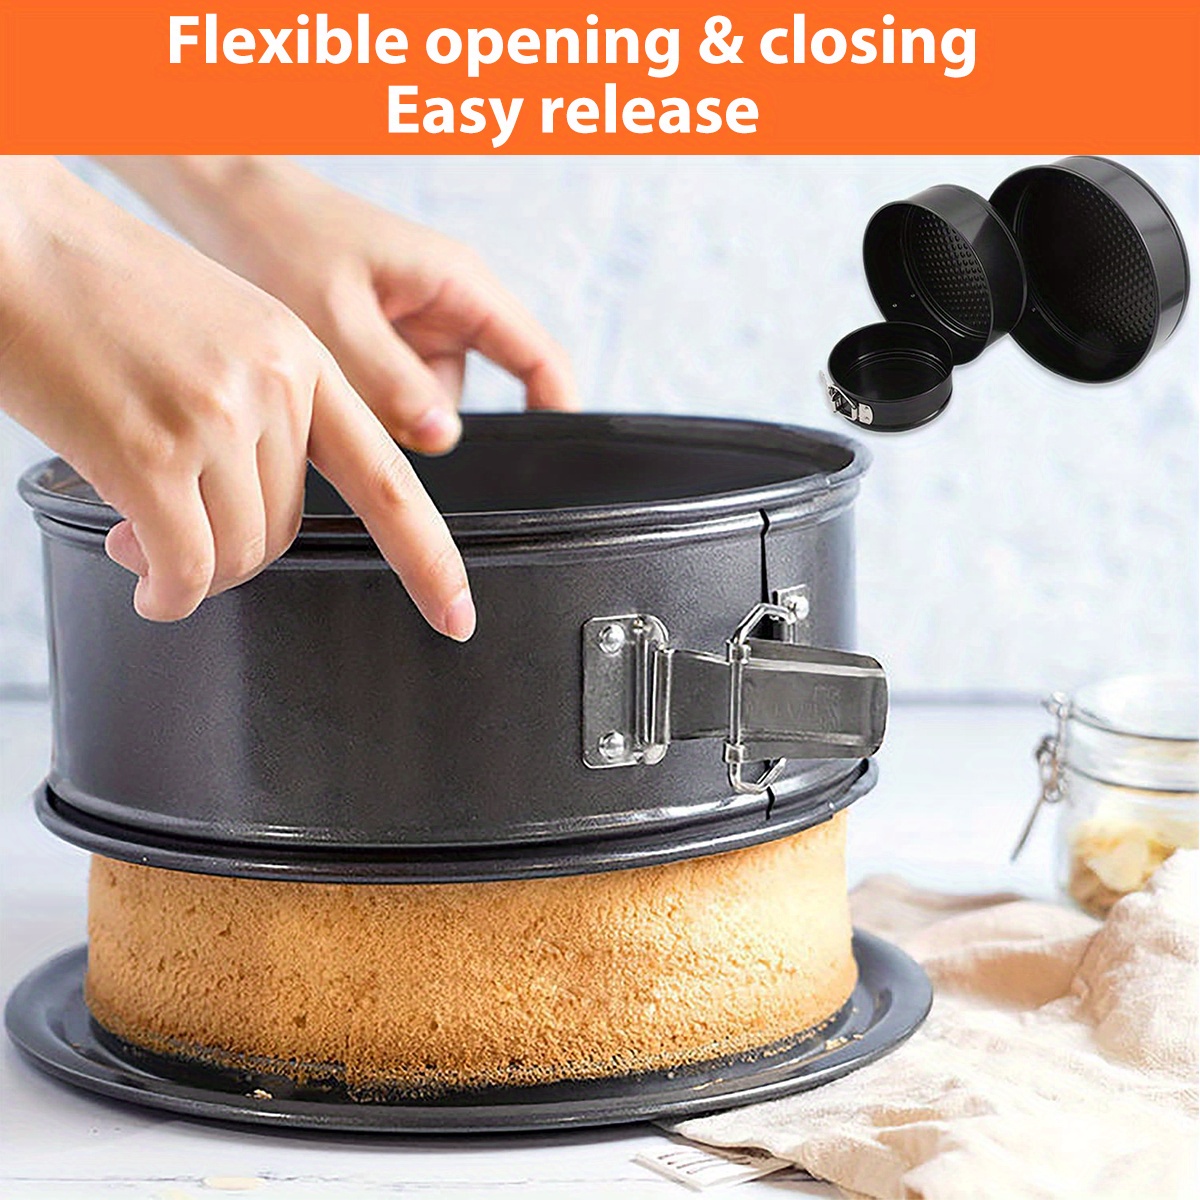  isheTao Cake Pan Set for Baking, Non-Stick Springform Pans Set  of 4 (4, 7, 9 10inches), Round Cake Pans,Cheesecake Pan, Leak-Proof Cake  Pans with Removable Bottom: Home & Kitchen